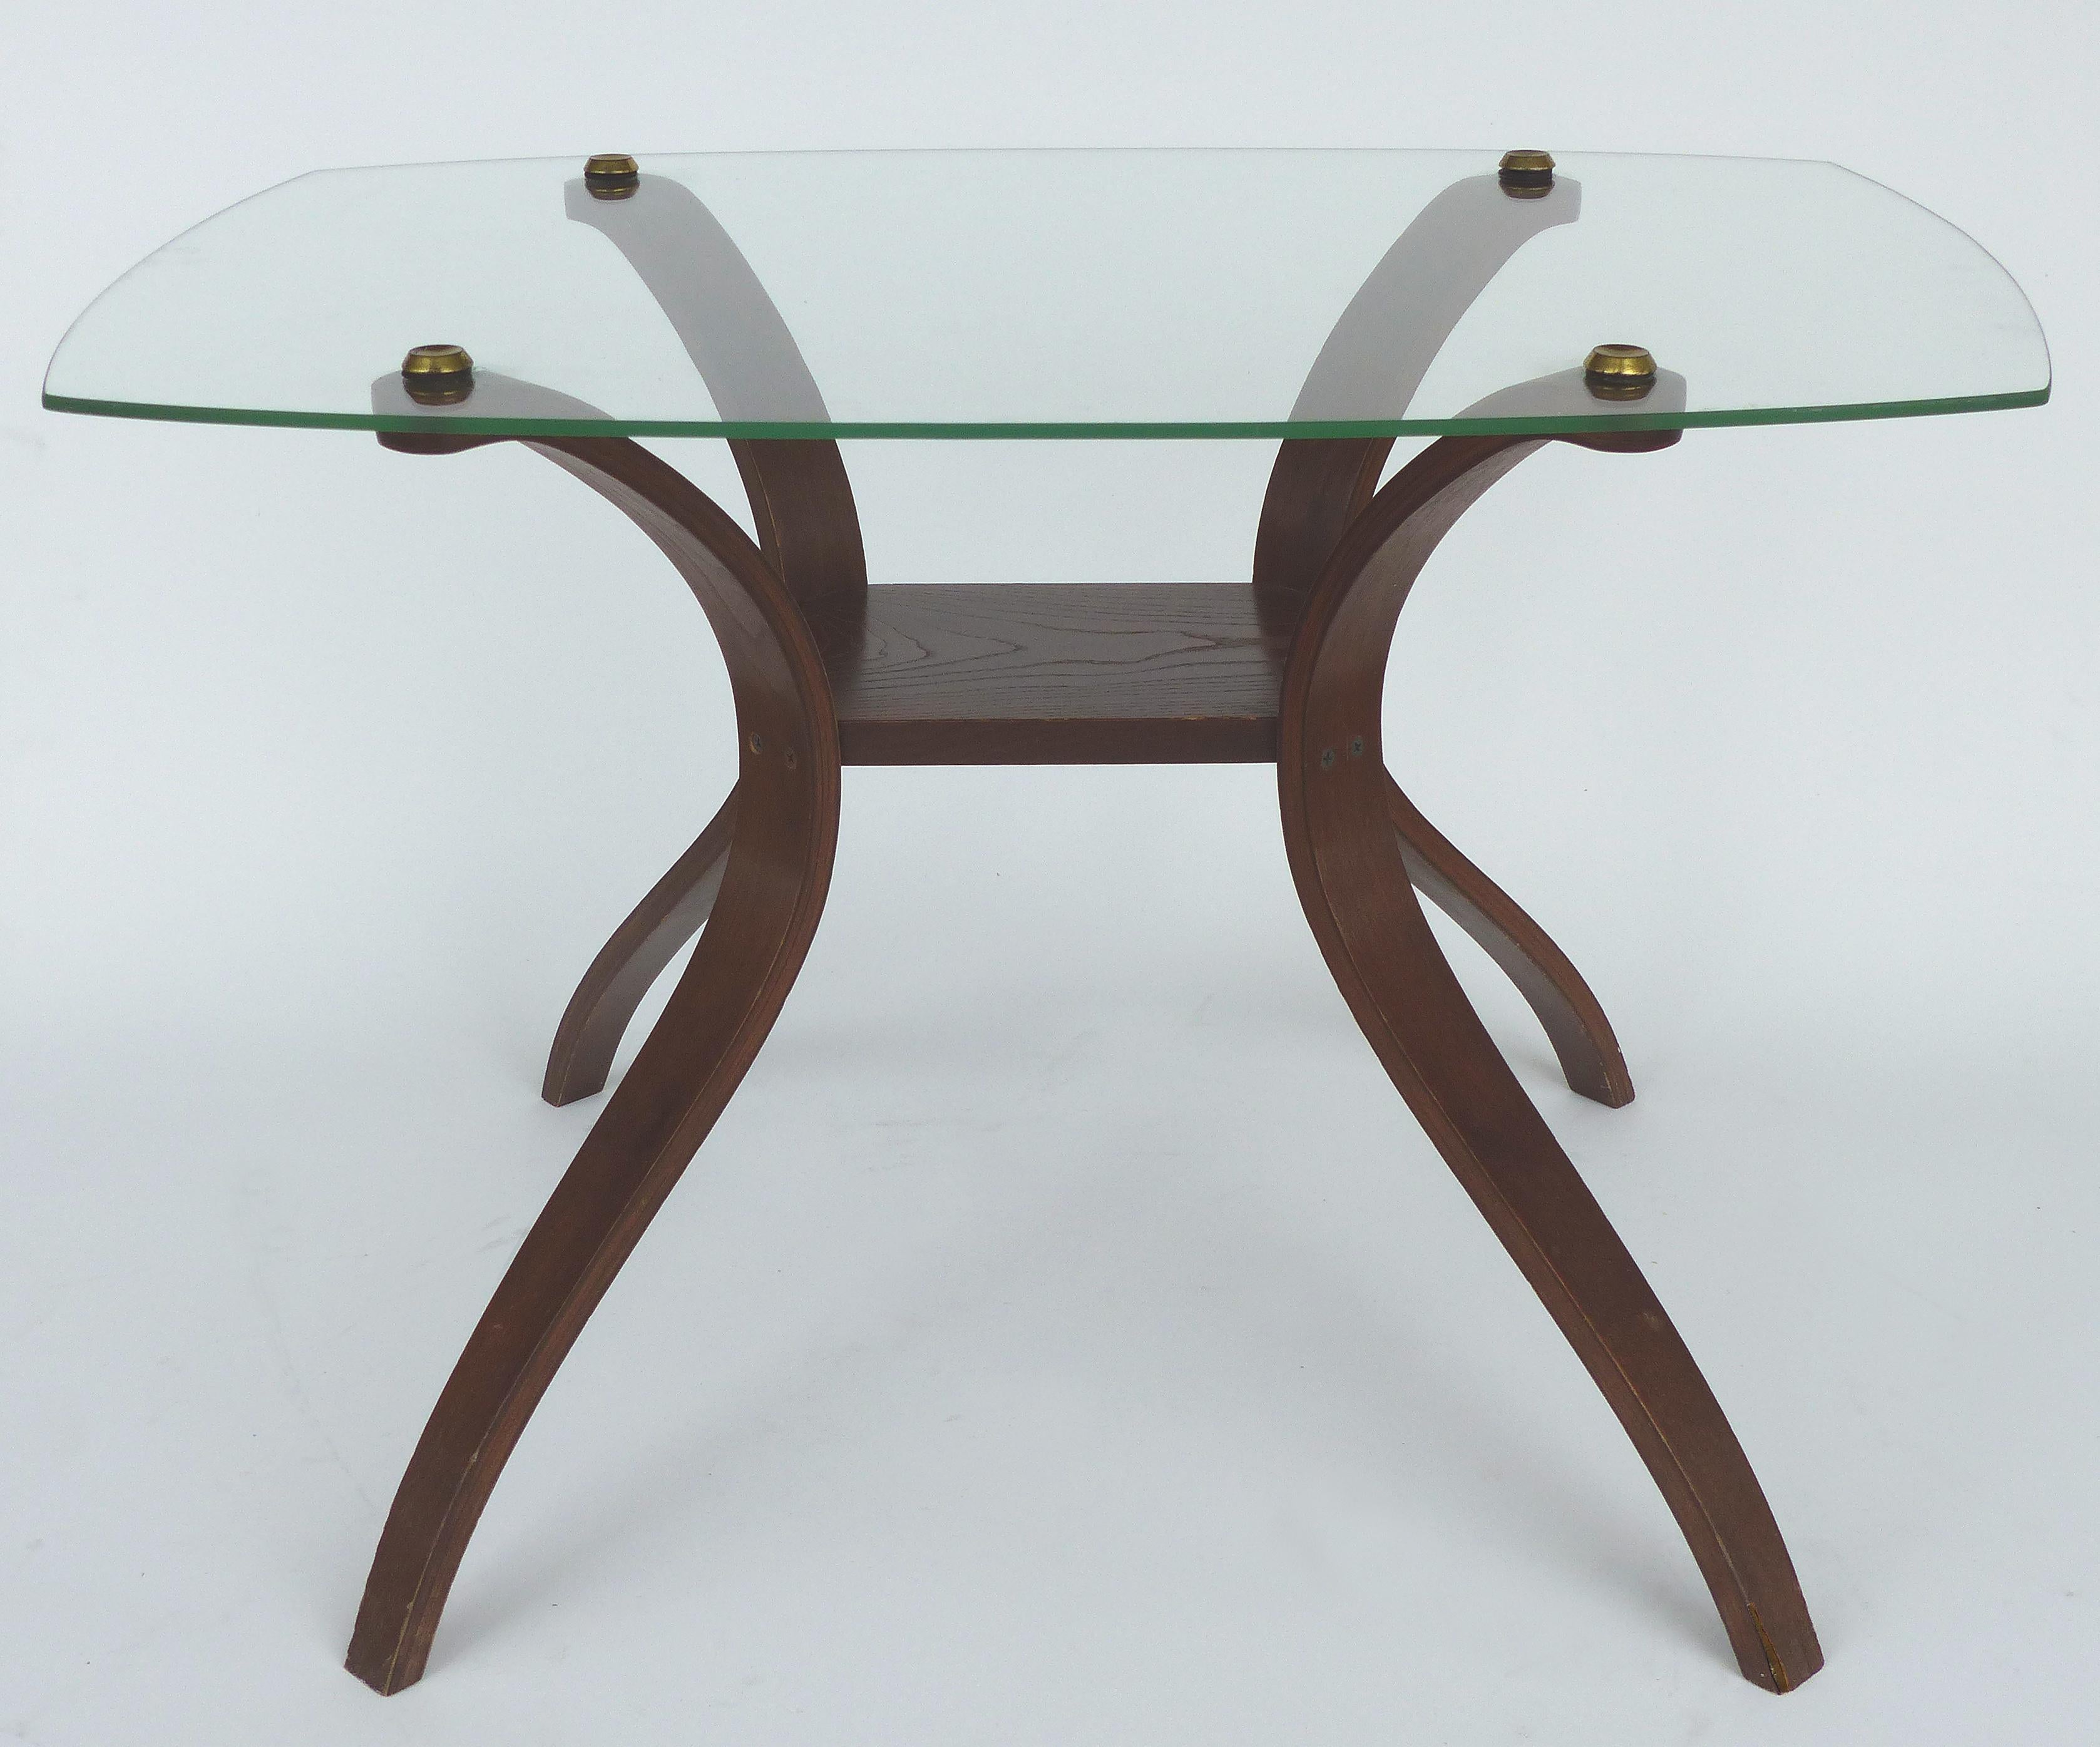 Mid-Century Modern Floating Glass, Brass and Bentwood Side Tables, Pair

Offered for sale is a pair of Mid-Century Modern bentwood side table with floating glass tops that are secured with brass decorative caps. These very 